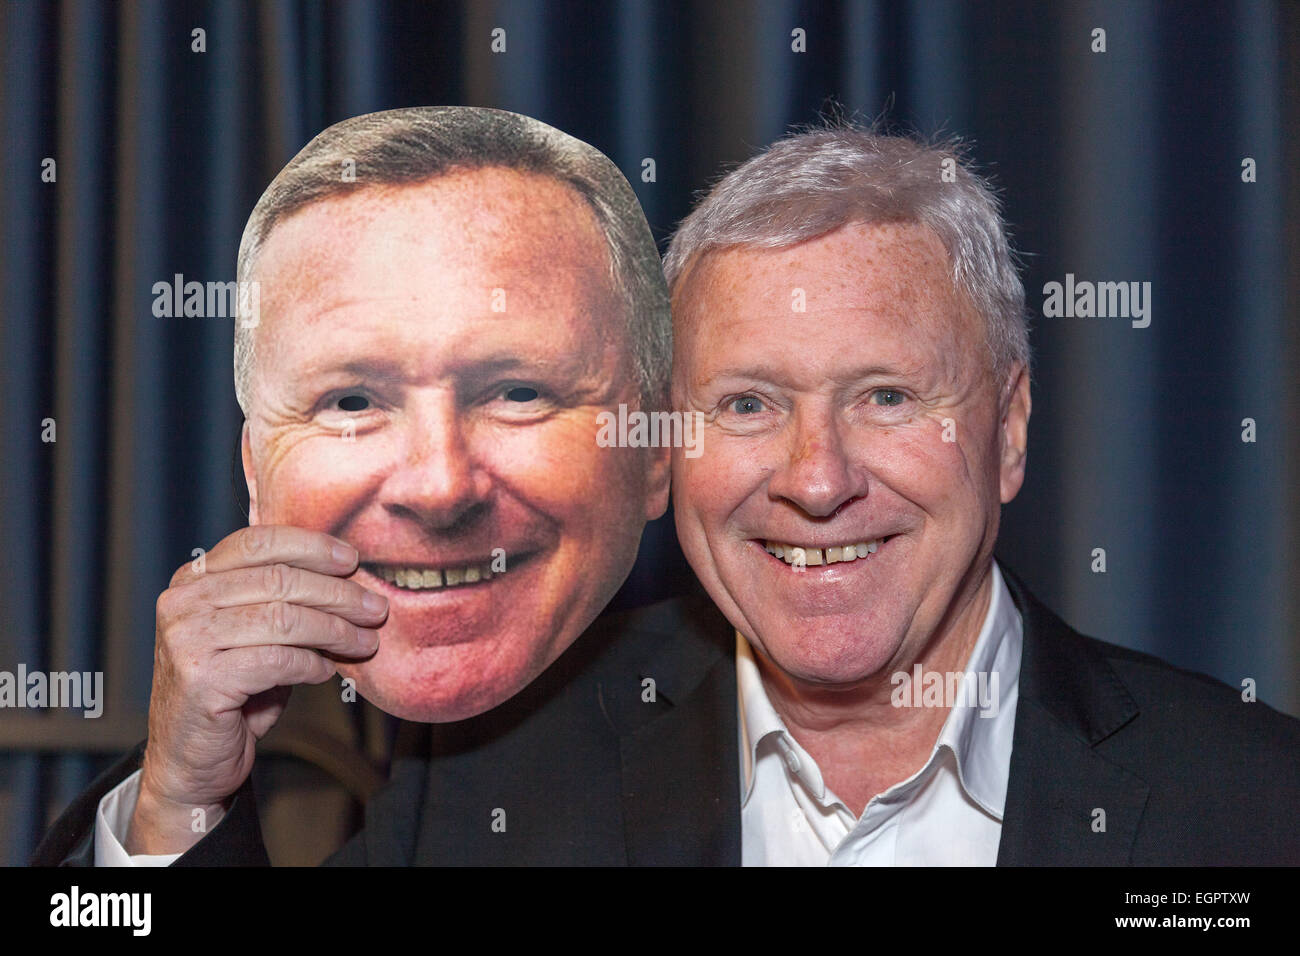 Walsall, West Midlands, UK. 28th February, 2015. Big Centre TV: Presenter broadcaster David Hamilton with mask of himself at the launch of the new Midlands television station. Big Centre TV is the new local television station for the Midlands – Birmingham, Walsall, Wolverhampton, Solihull and The Black Country. The channel went on air on Freeview channel 8 at 6pm on Saturday 28 February 2015. The station serves a potential audience of 2.3 million around Birmingham and the Black Country. Credit:  John Henshall/Alamy Live News PER0453 Stock Photo